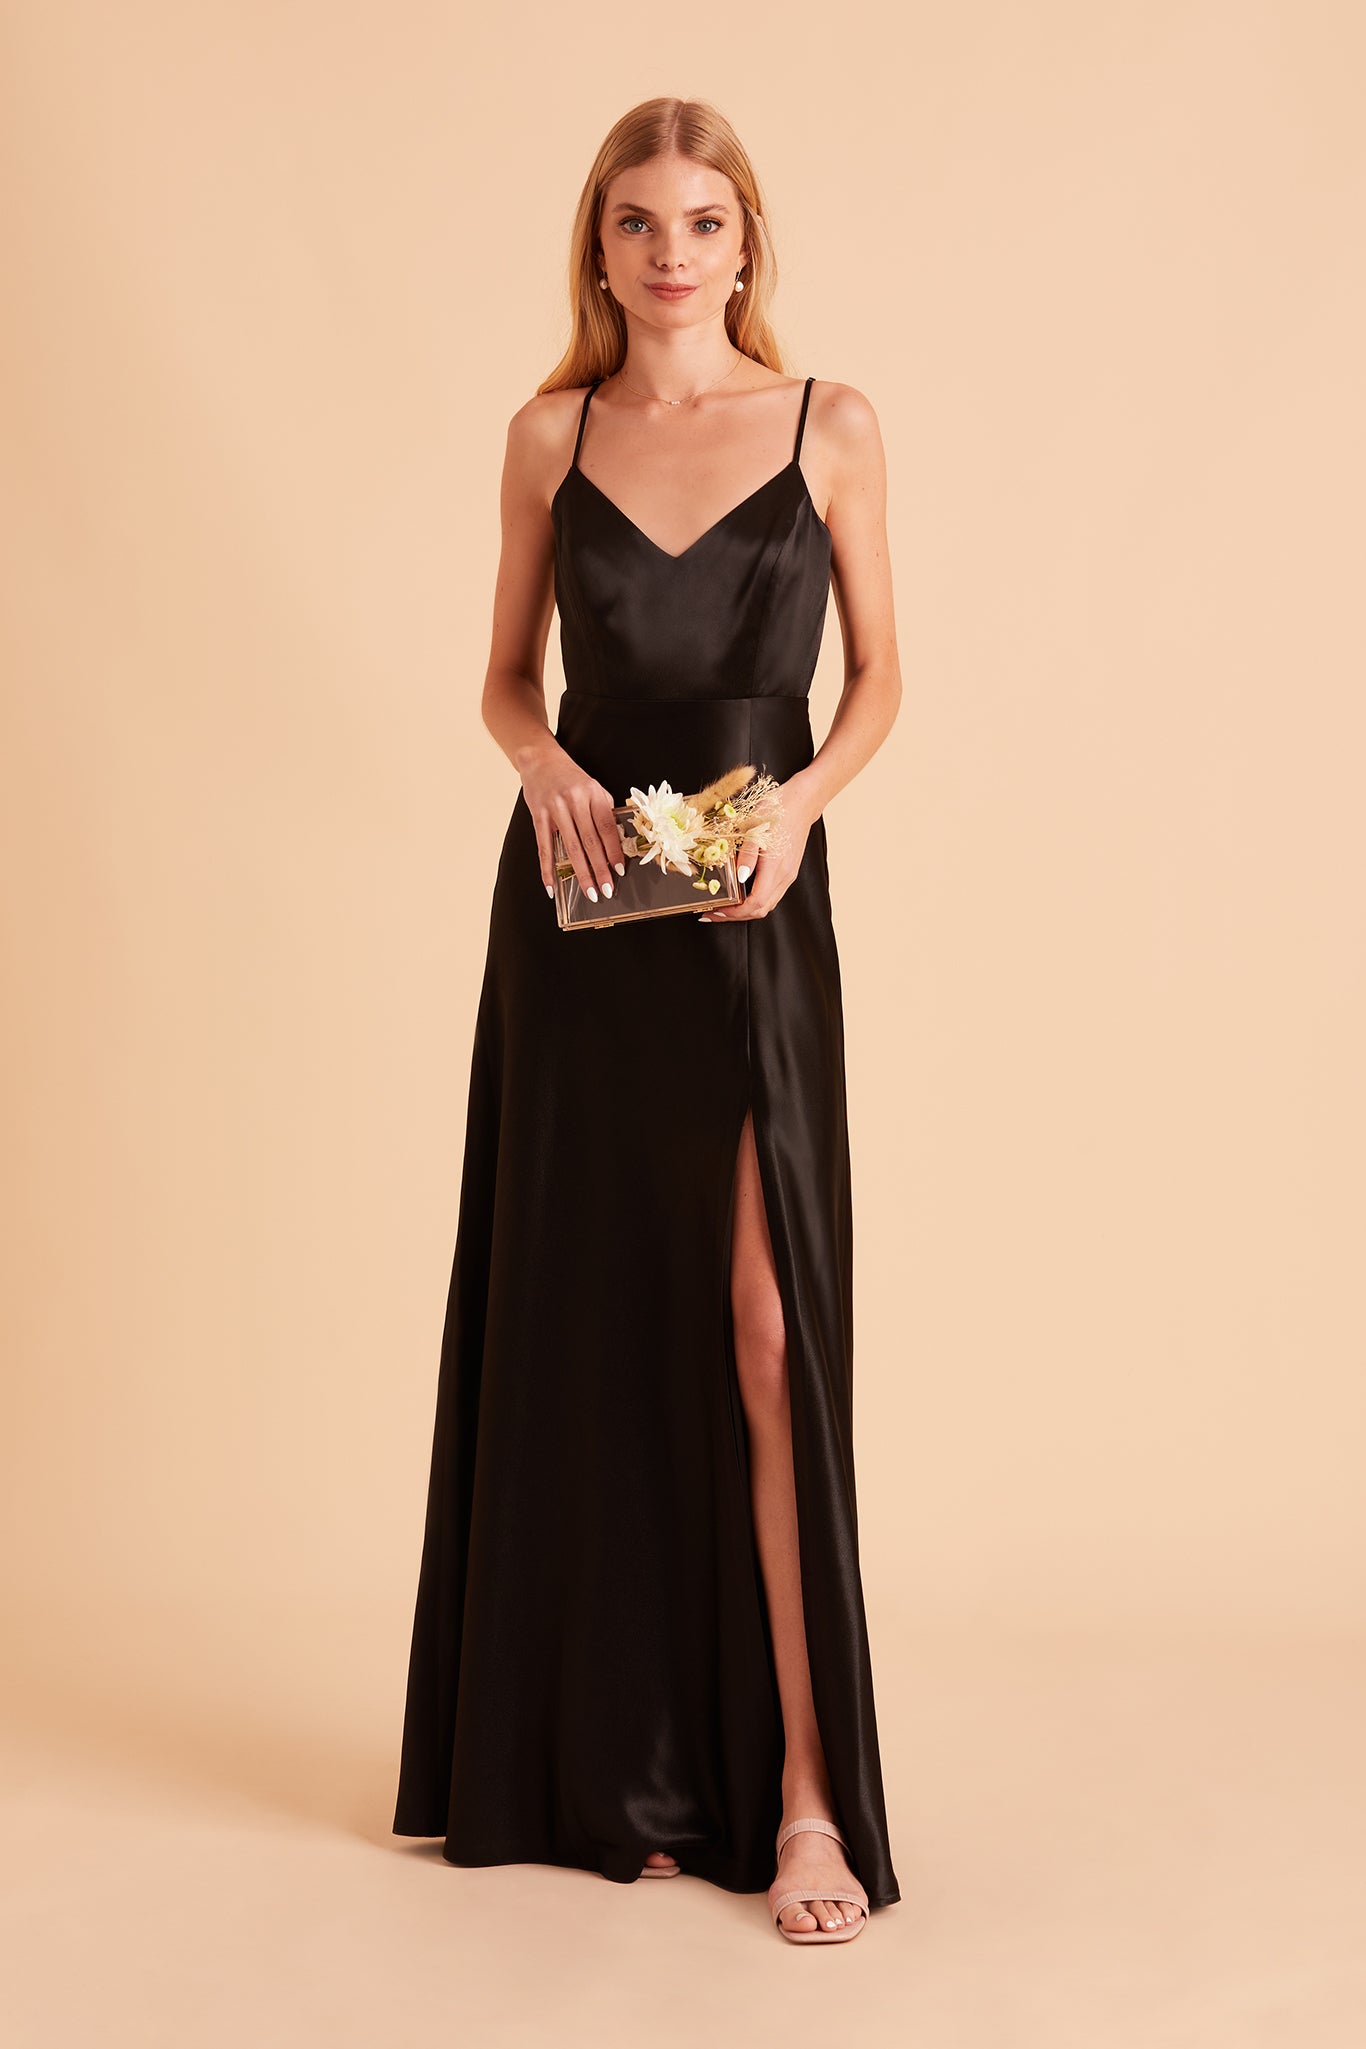 Jay bridesmaid dress with slit in black satin by Birdy Grey, front view